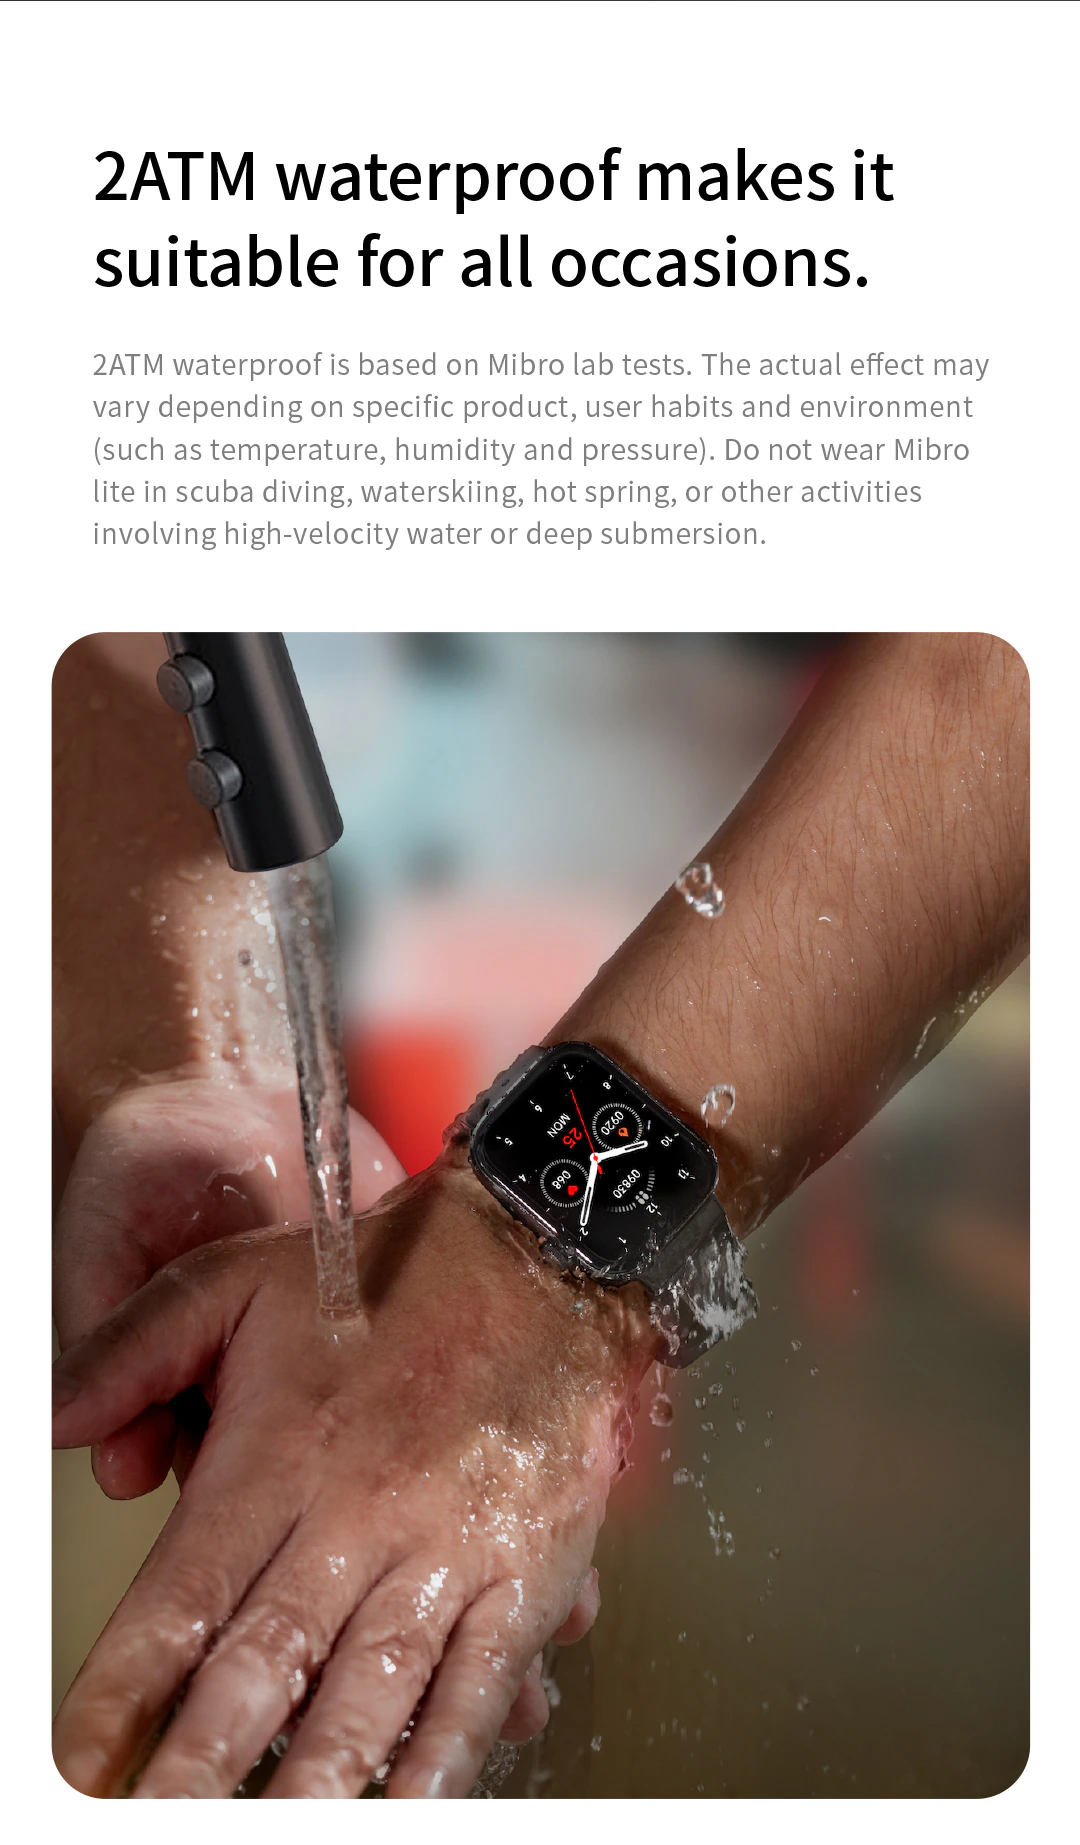 mibro-watch-T1-10-smartconnection.com.vn